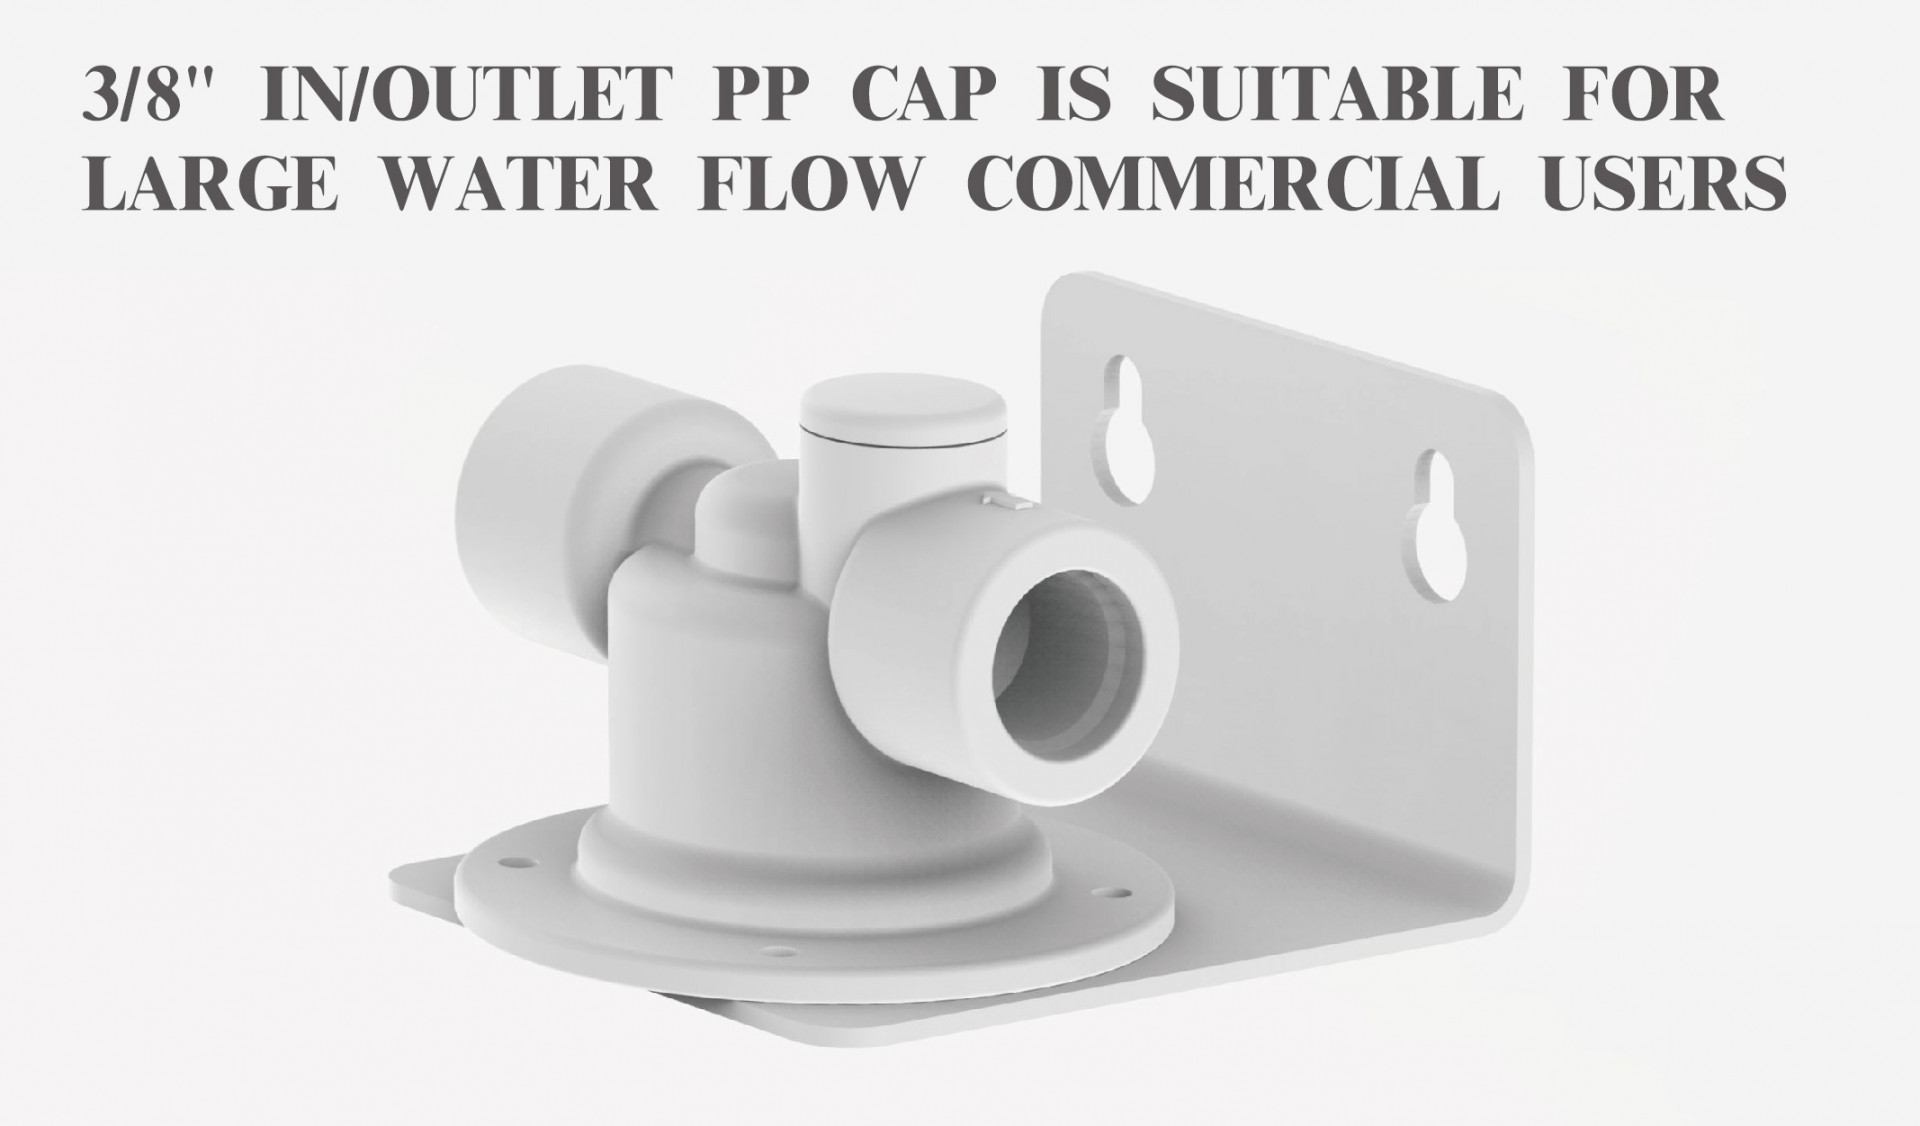 HOUSING 3/8 IN/OUTLET PP CAP IS SUITABLE FOR LARGE WATER FLOW COMMERCIAL USERS